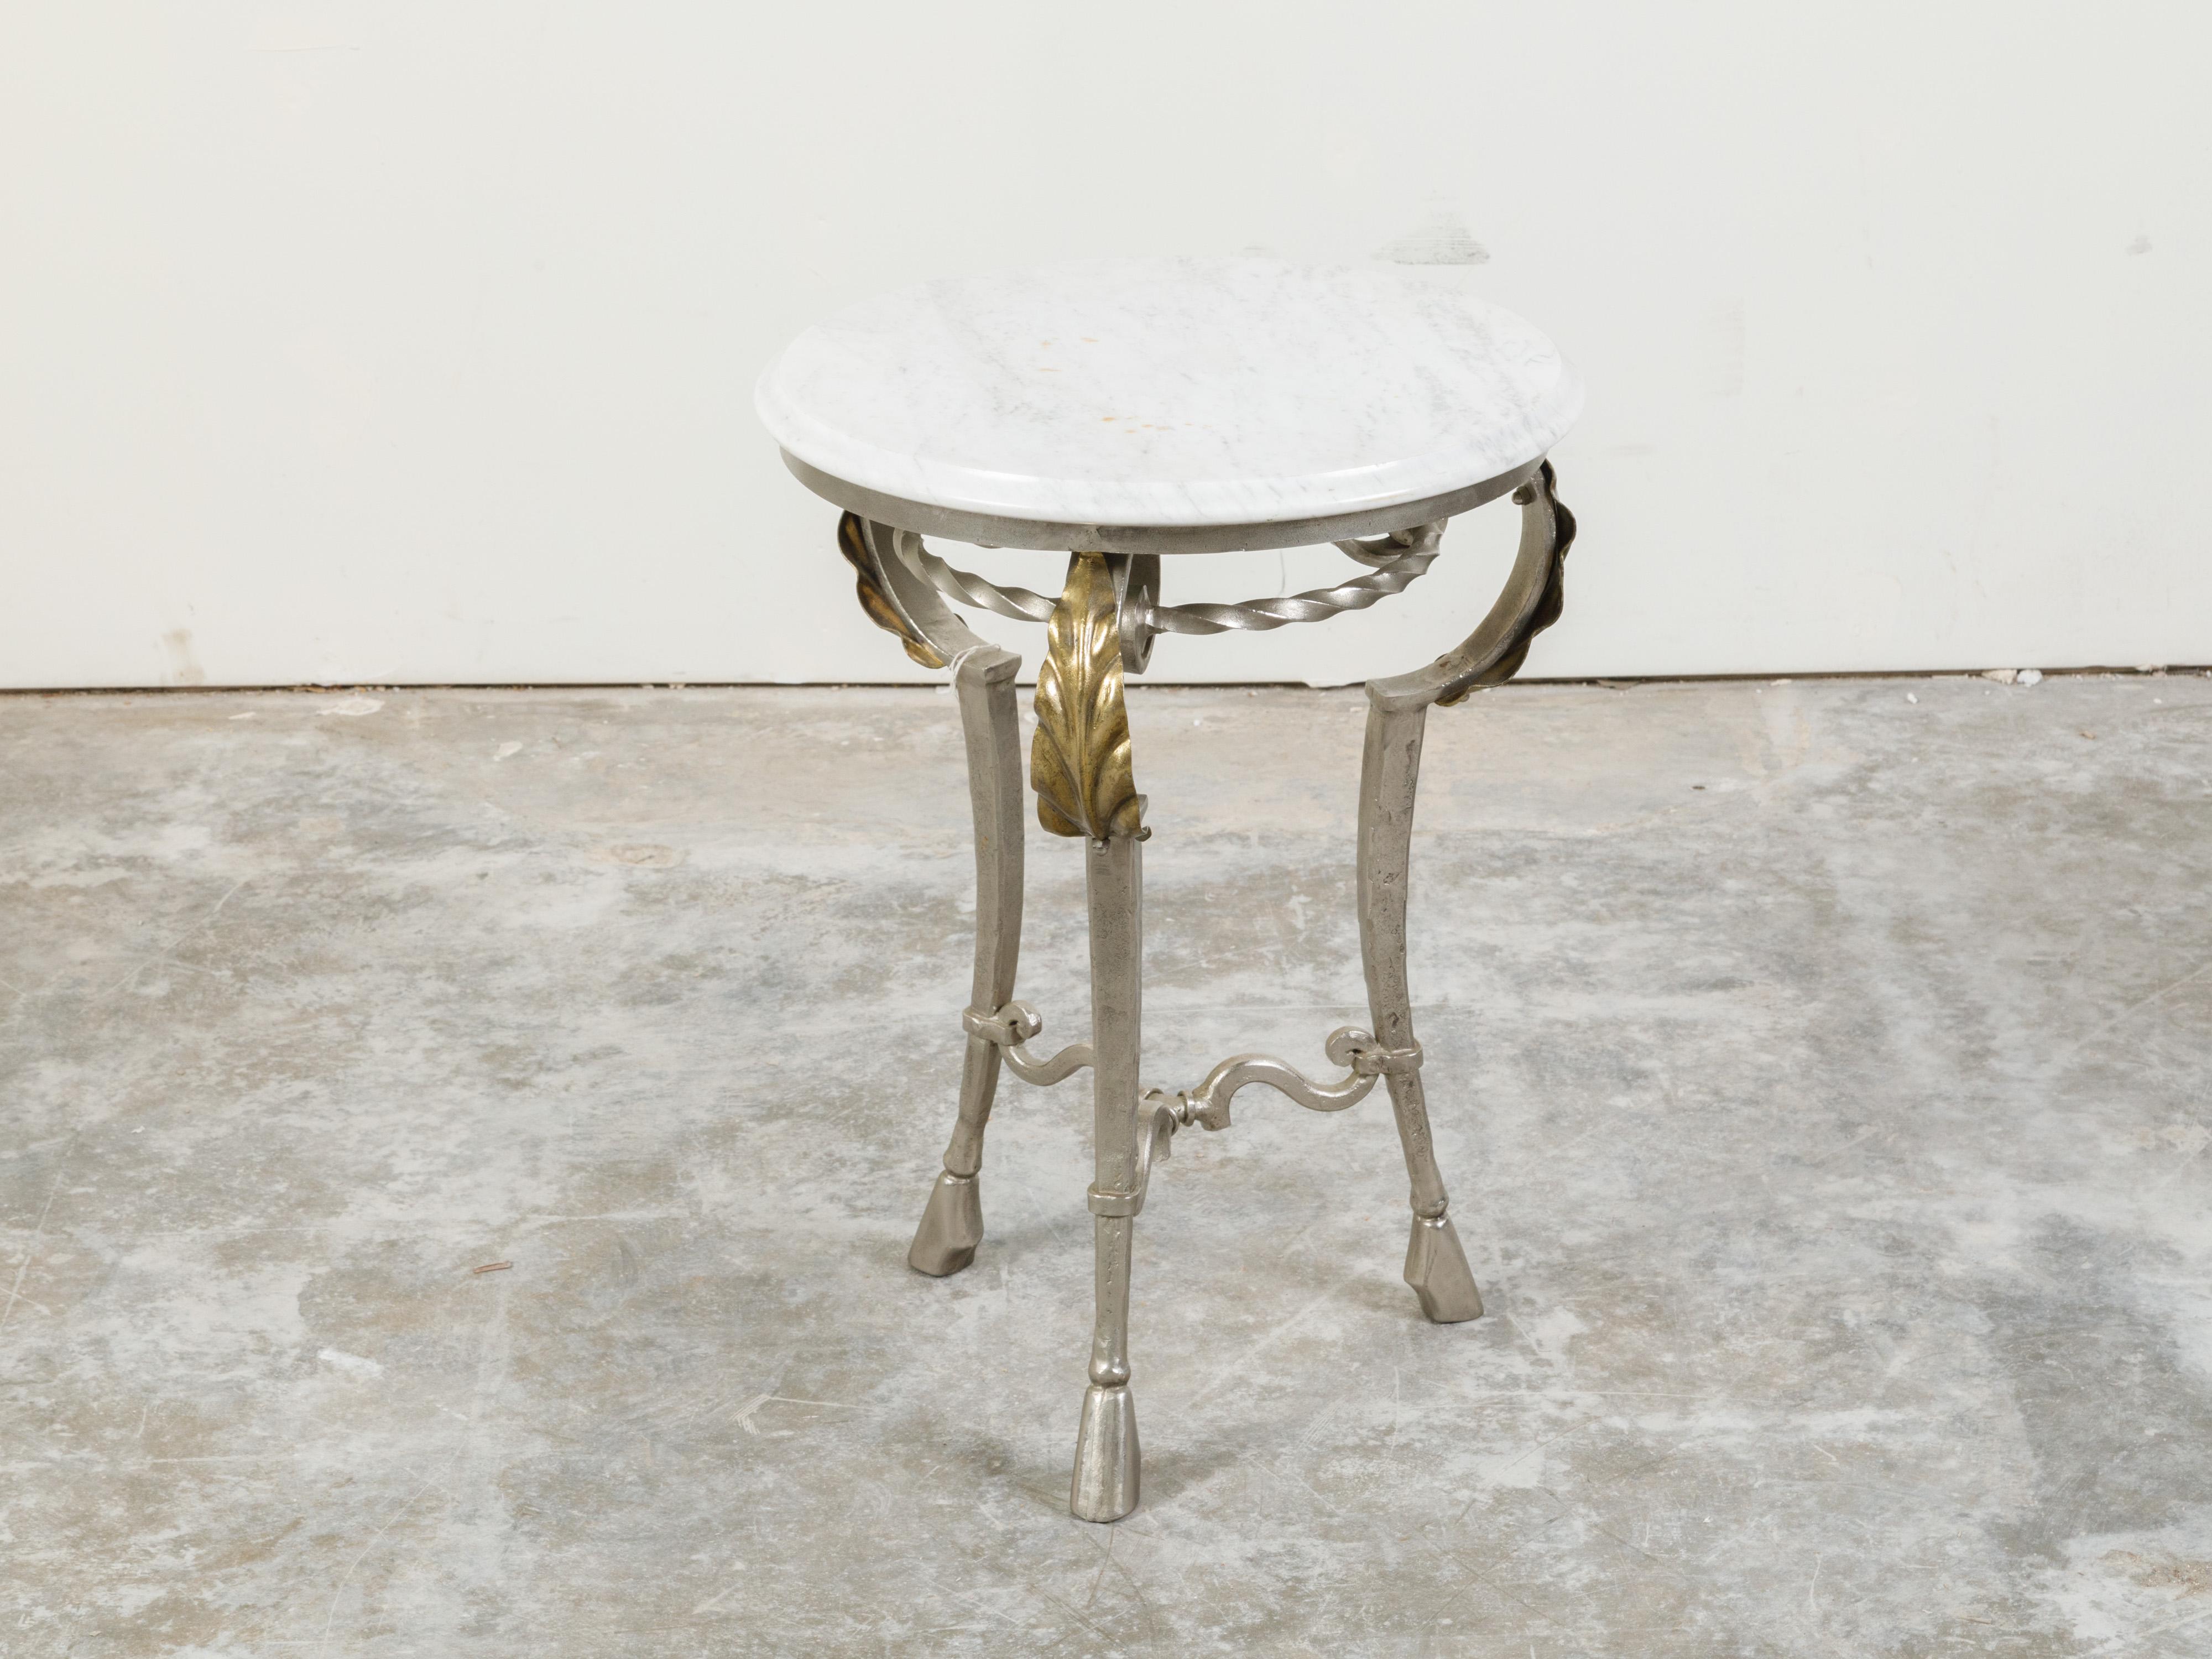 An Italian steel side table from the mid 20th century, with white veined marble top, acanthus leaves and hoofed feet. Created in Italy during the midcentury period, this side table features a circular marble top sitting above a twisted ring